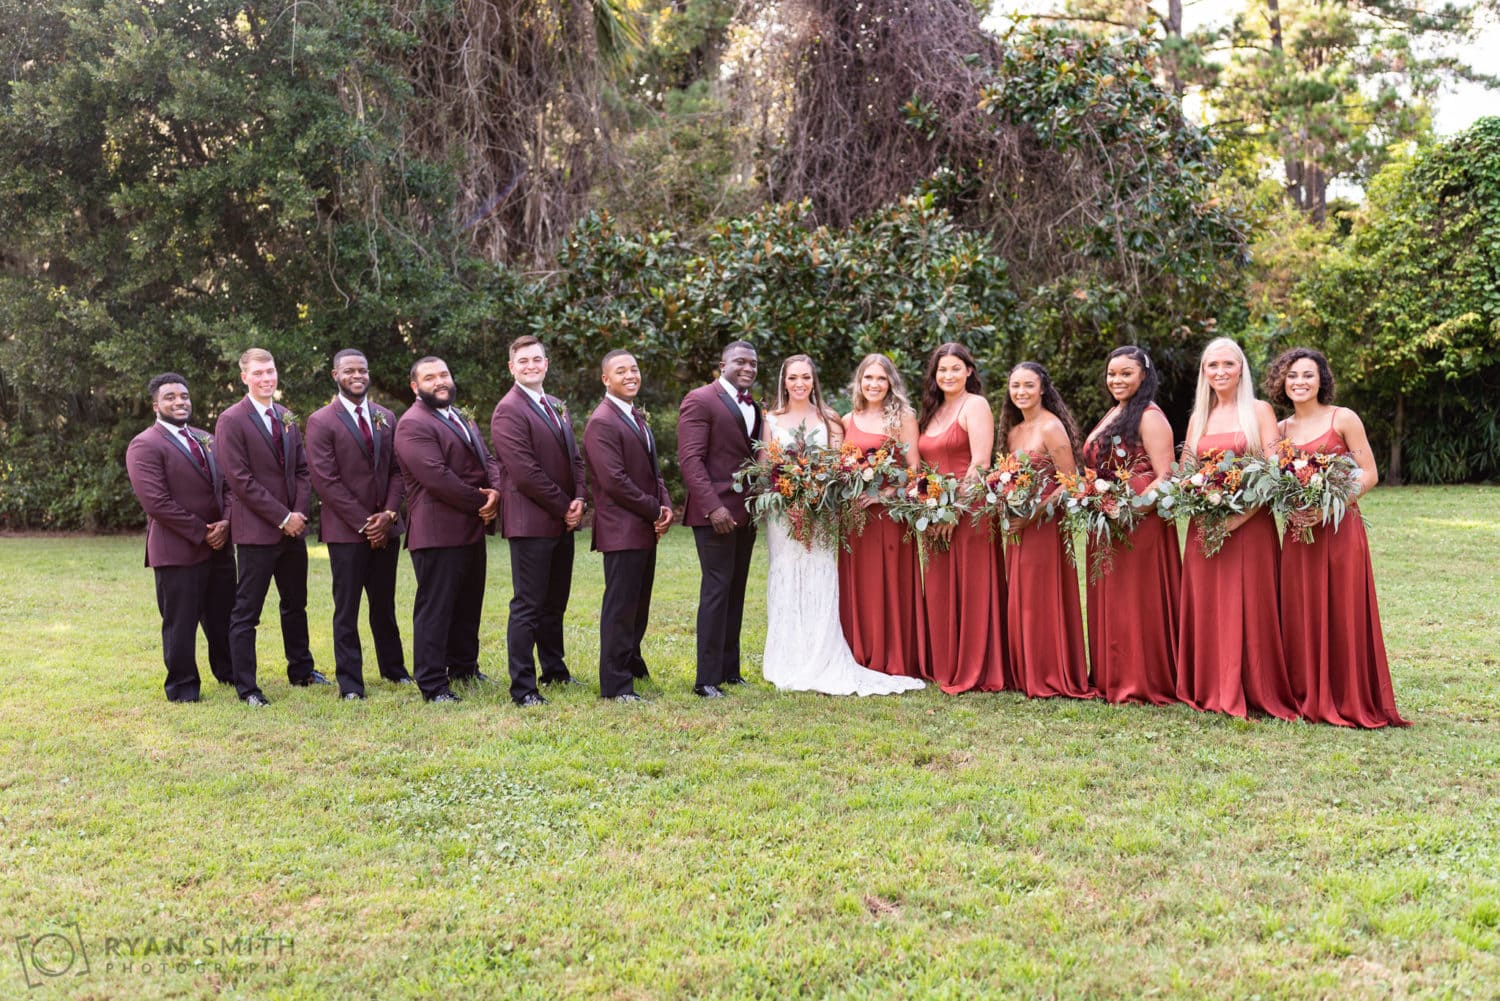 Bridal party pictures by the Carriage House - Magnolia Plantation - Charleston, SC